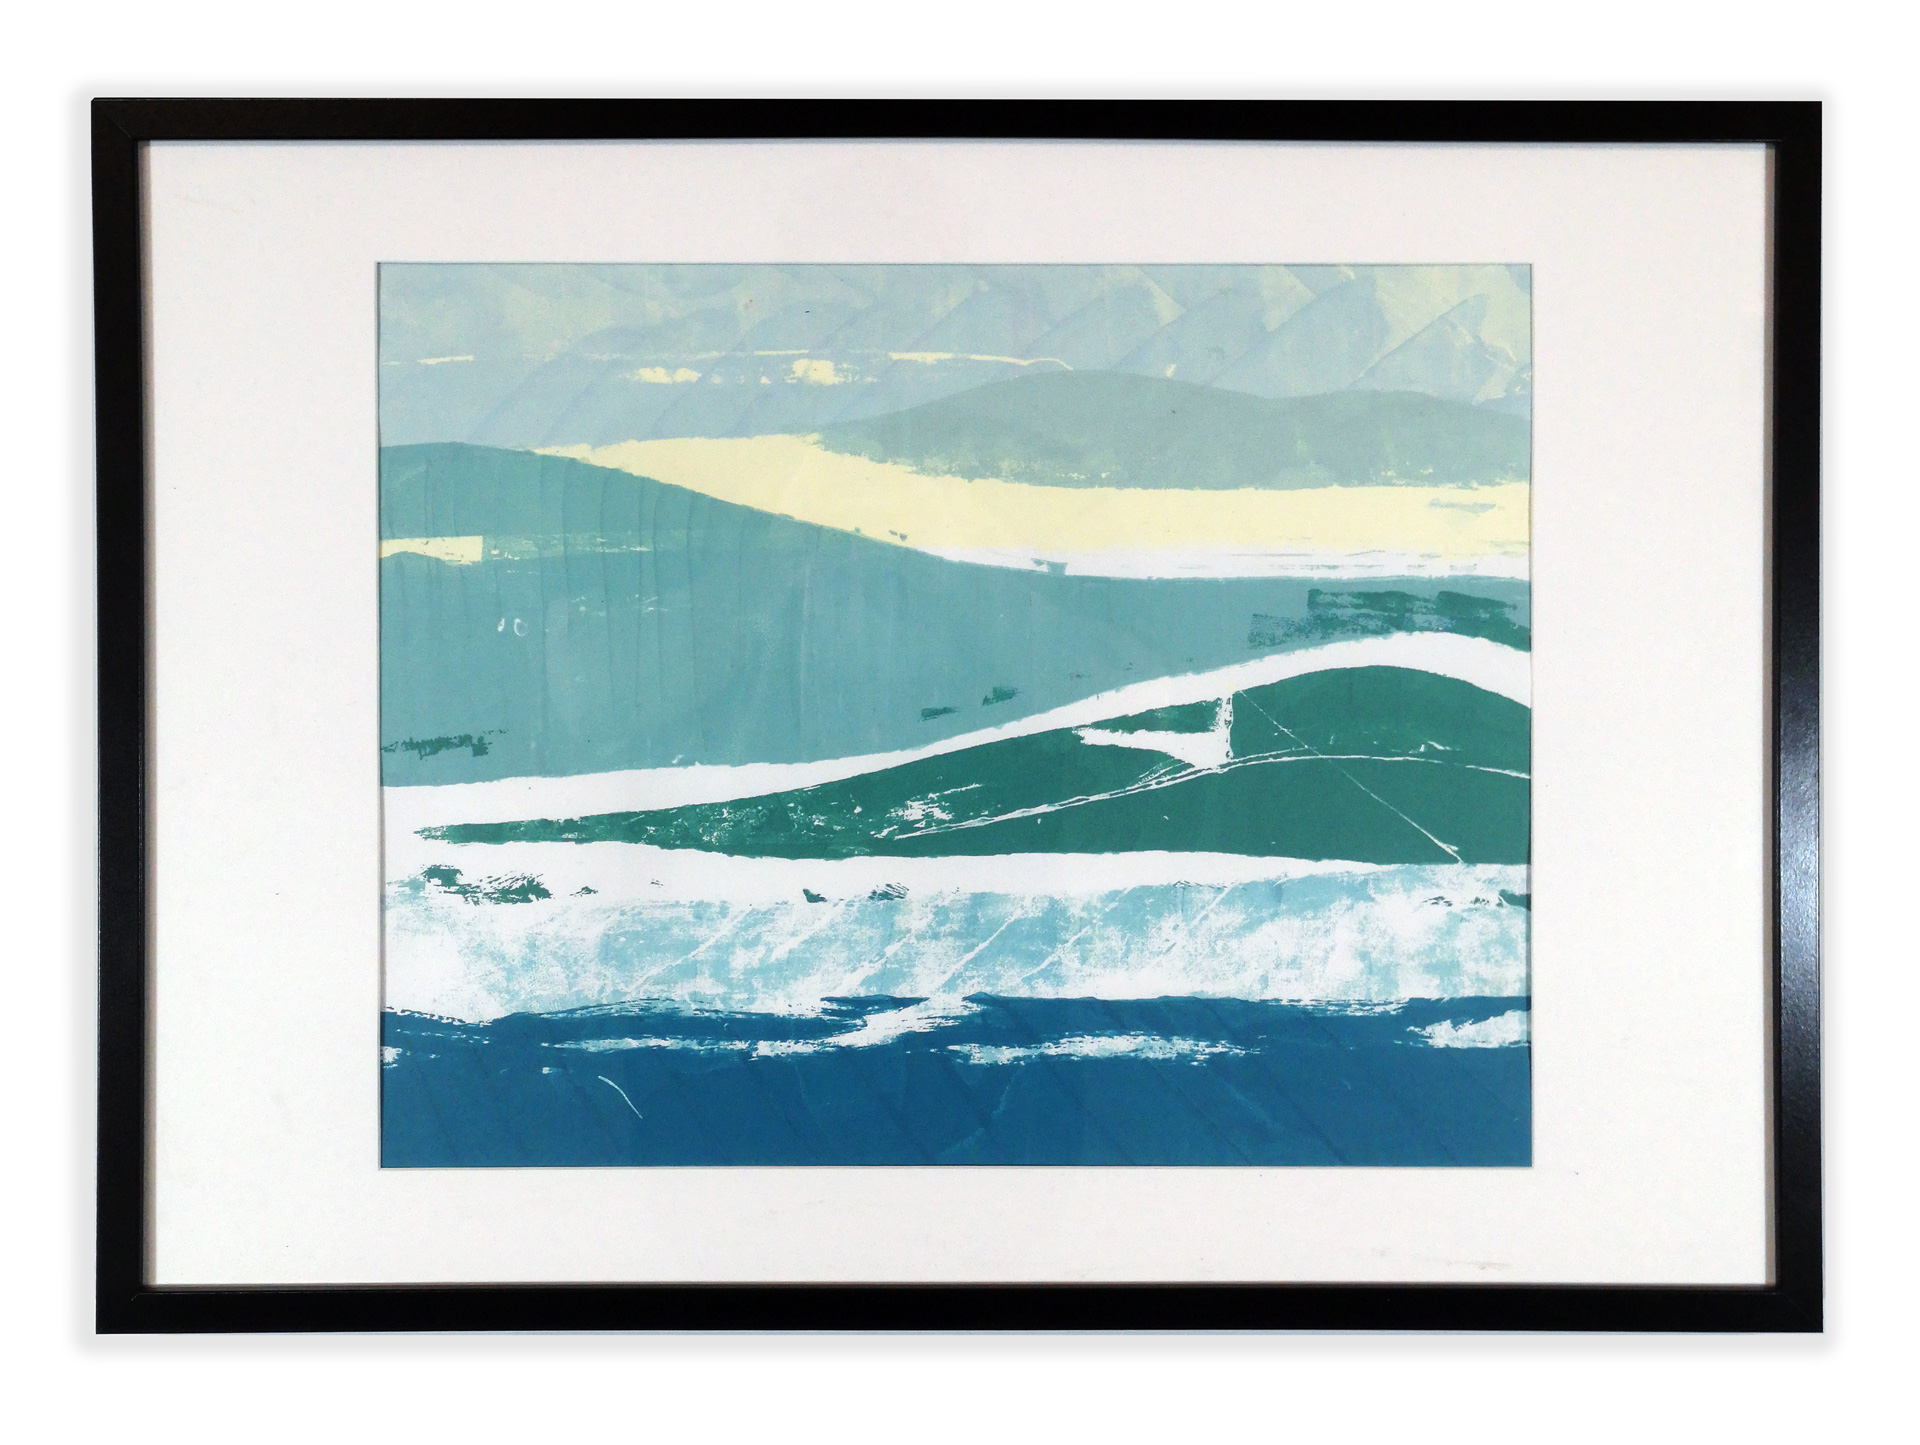 A screenprinted abstract landscape with shades of blue and green